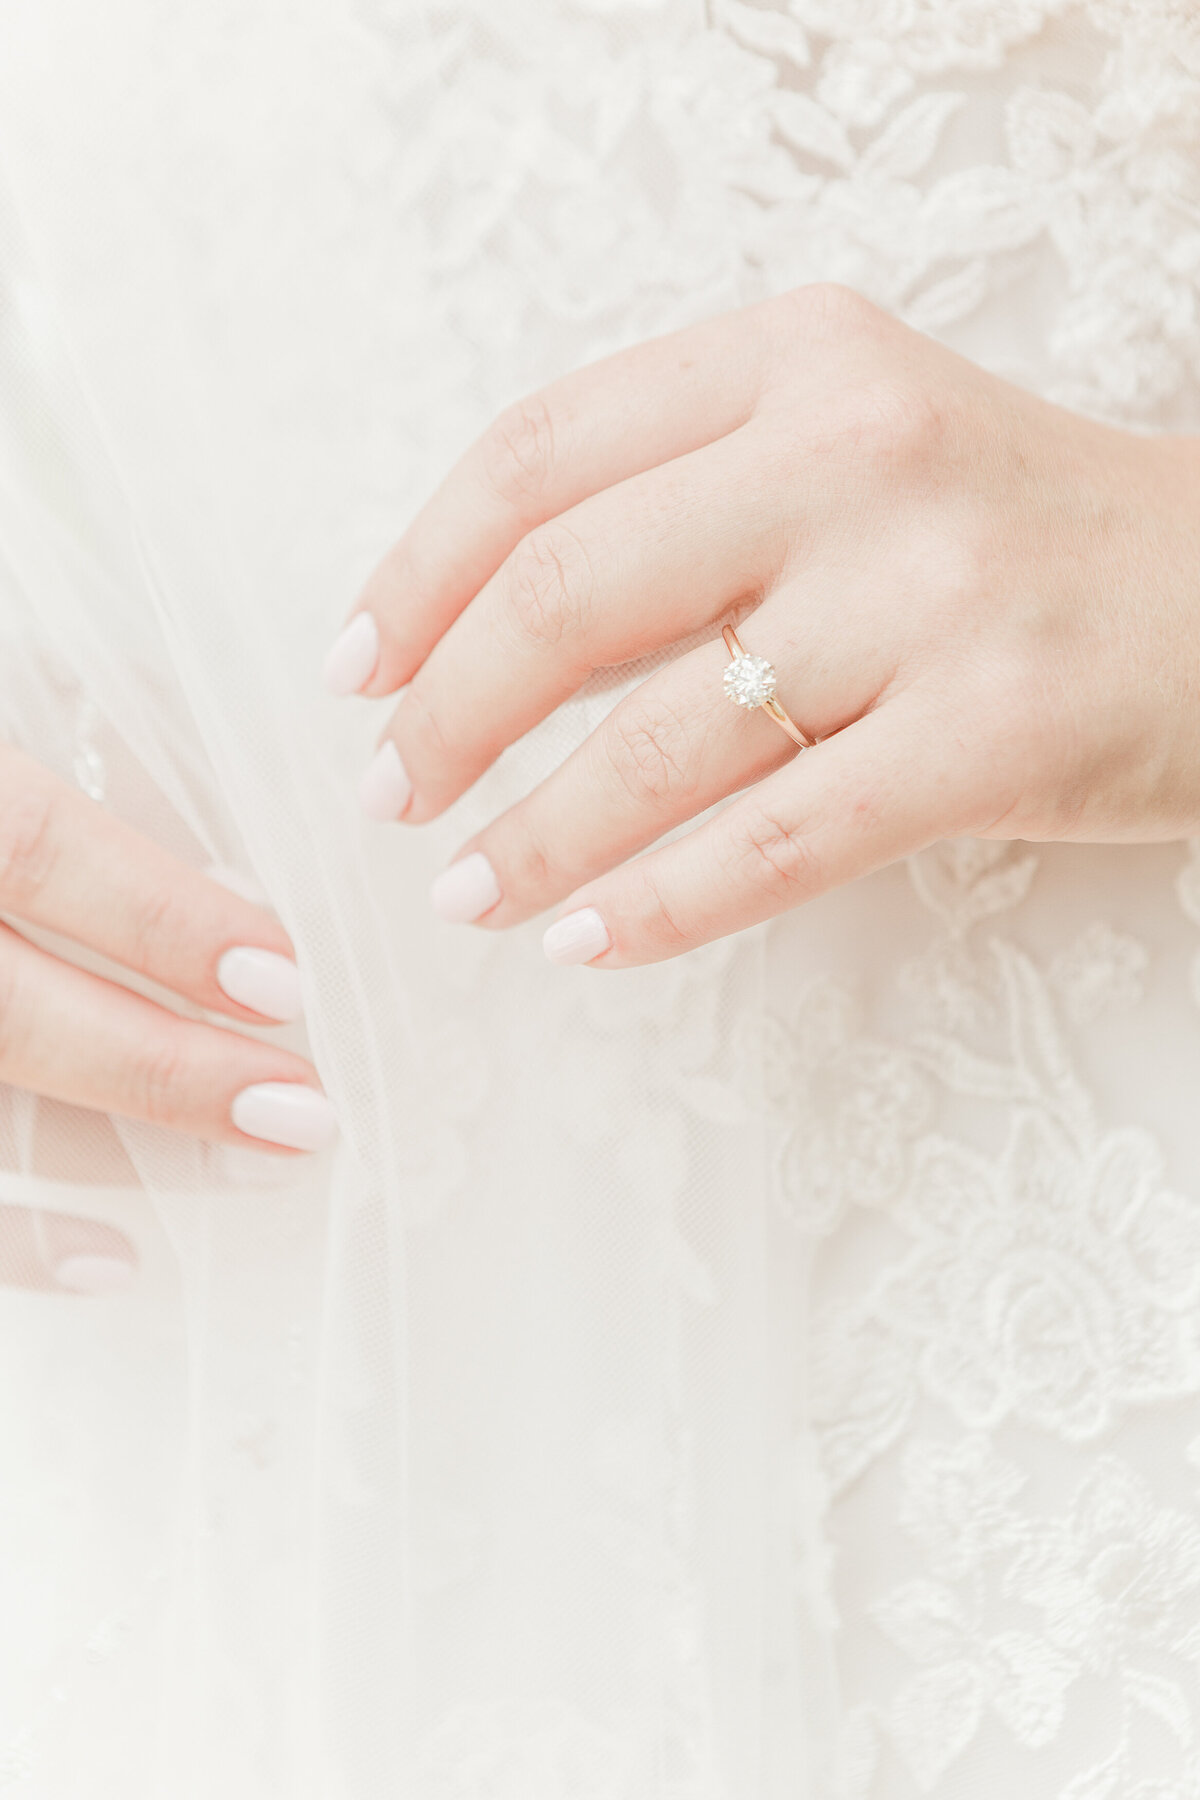 A close up image of the bride's hands. She is holding her veil gently. The image features her engagement ring.